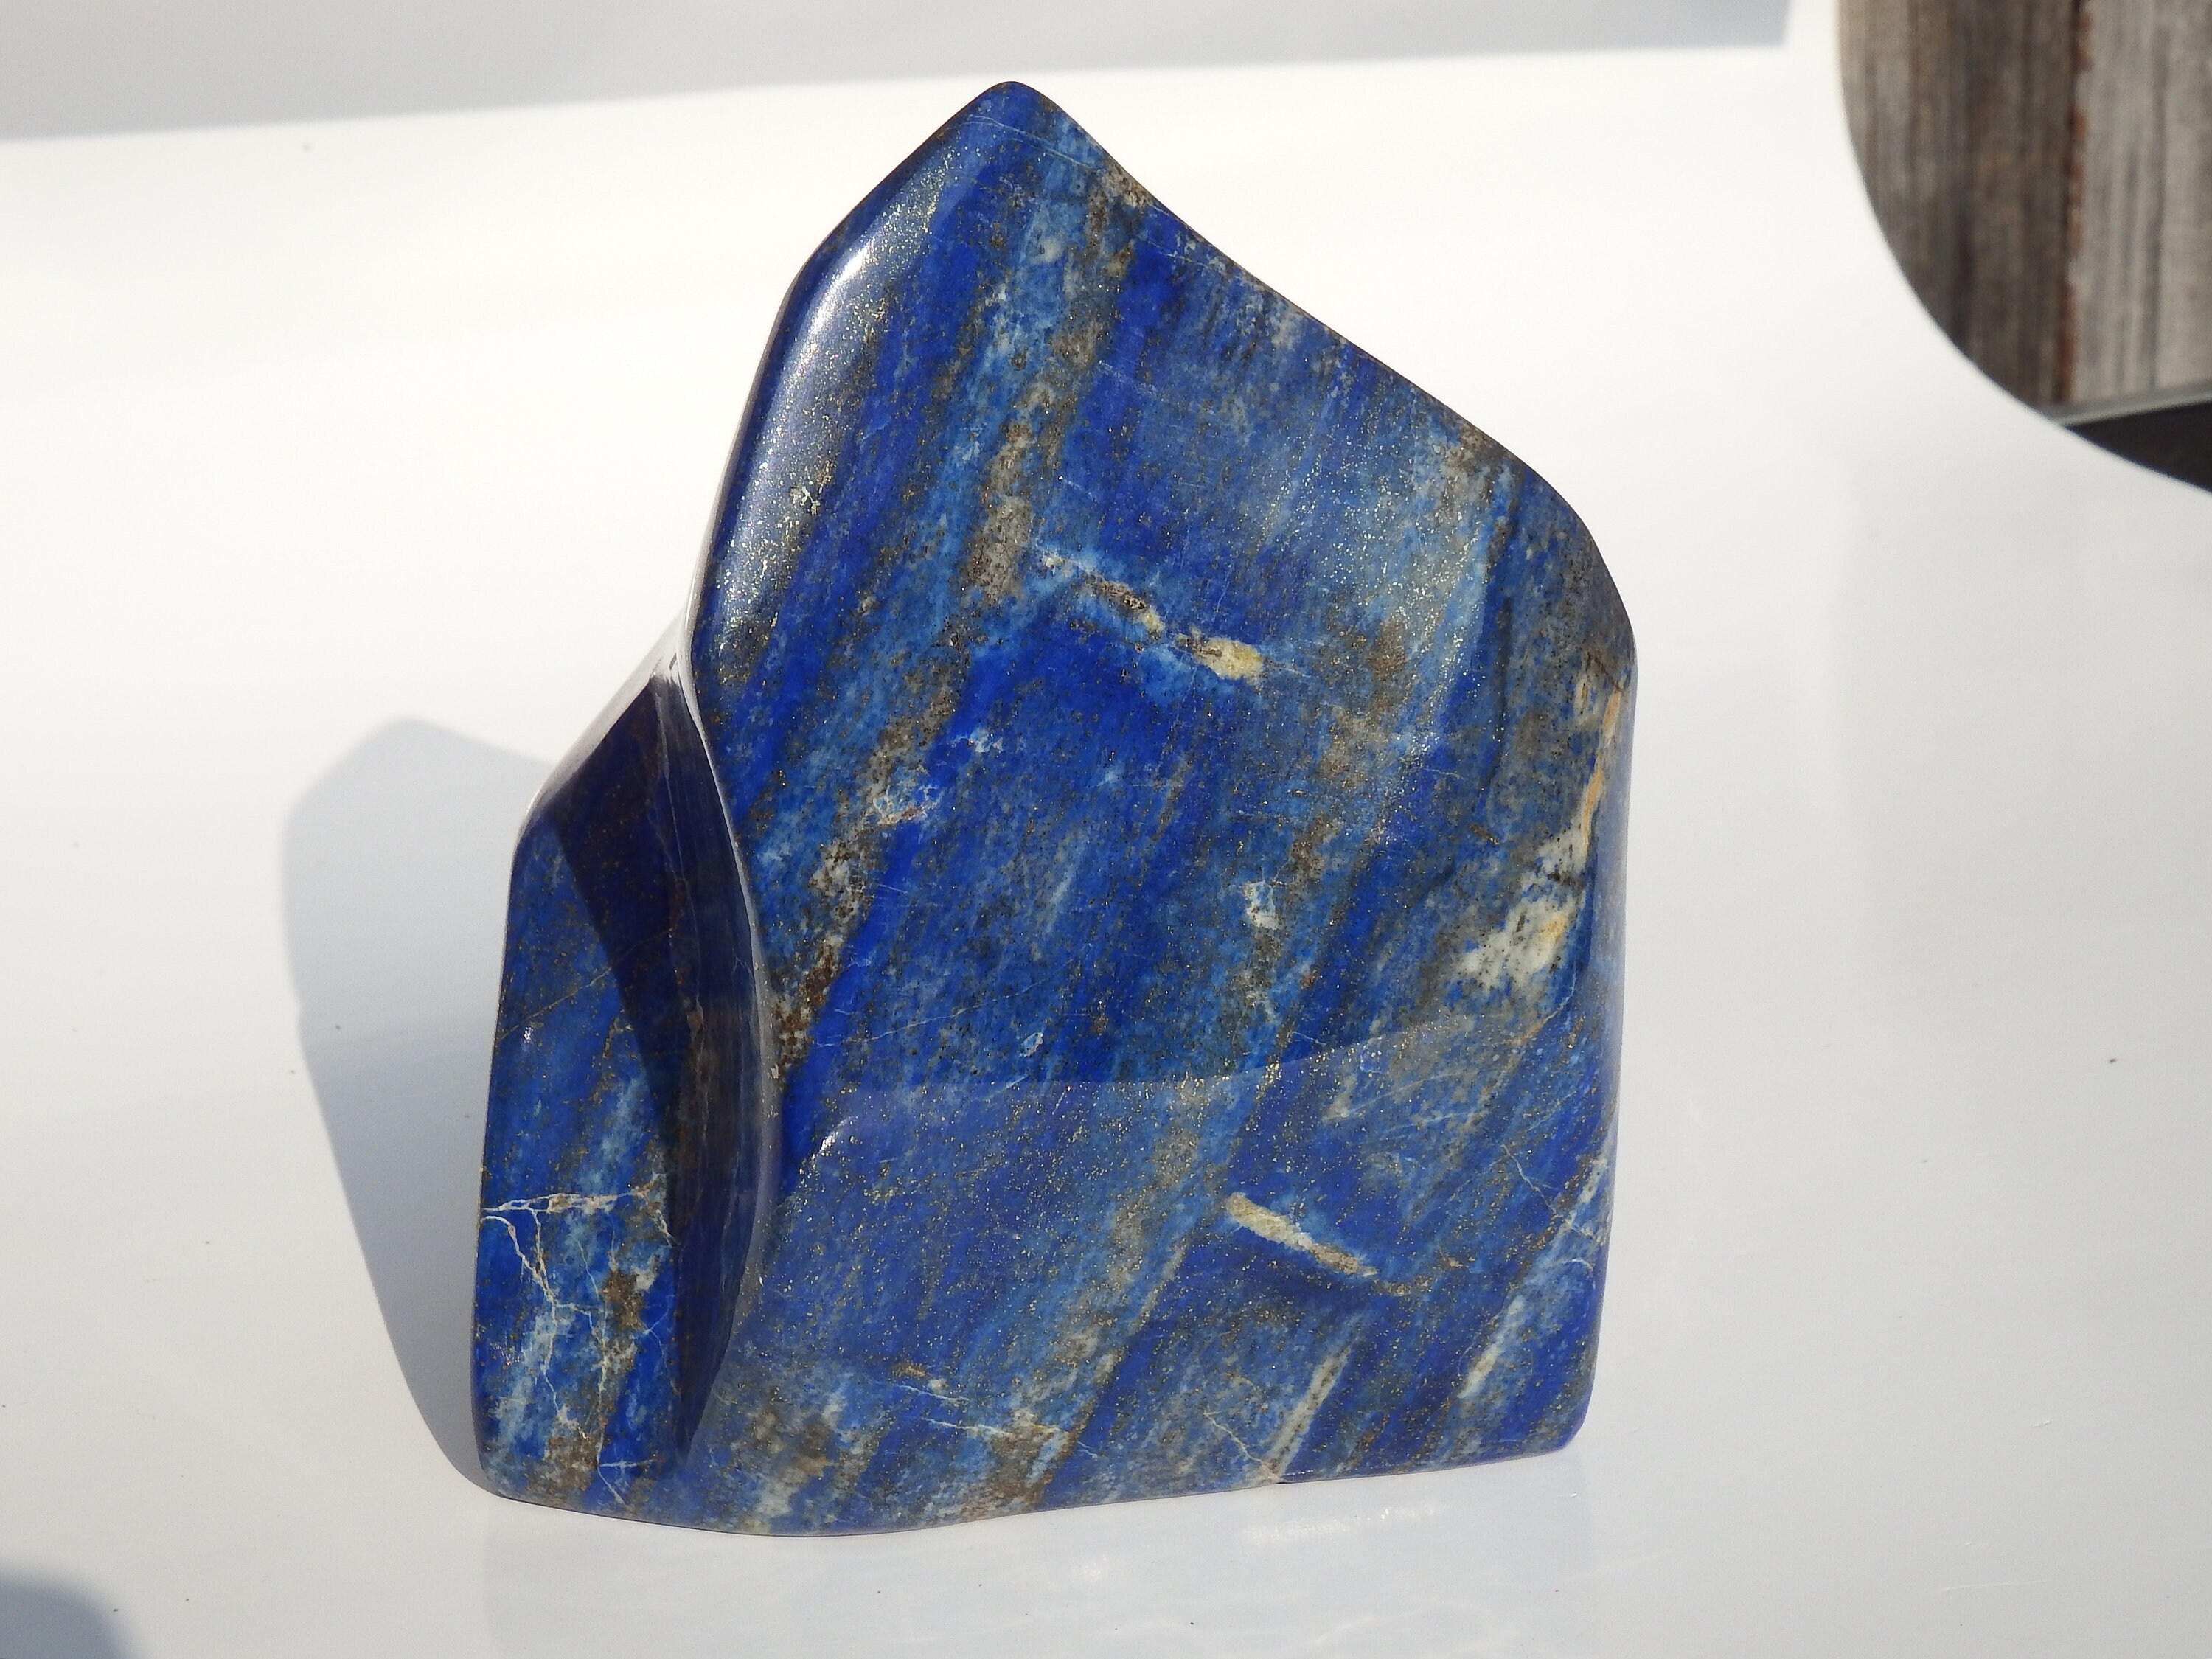 Large Lapis Lazuli Free Form Sculpture, Stone Carving, Gift for Him, Gift for Her, Natural Lapis Lazuli Carvingthumbnail